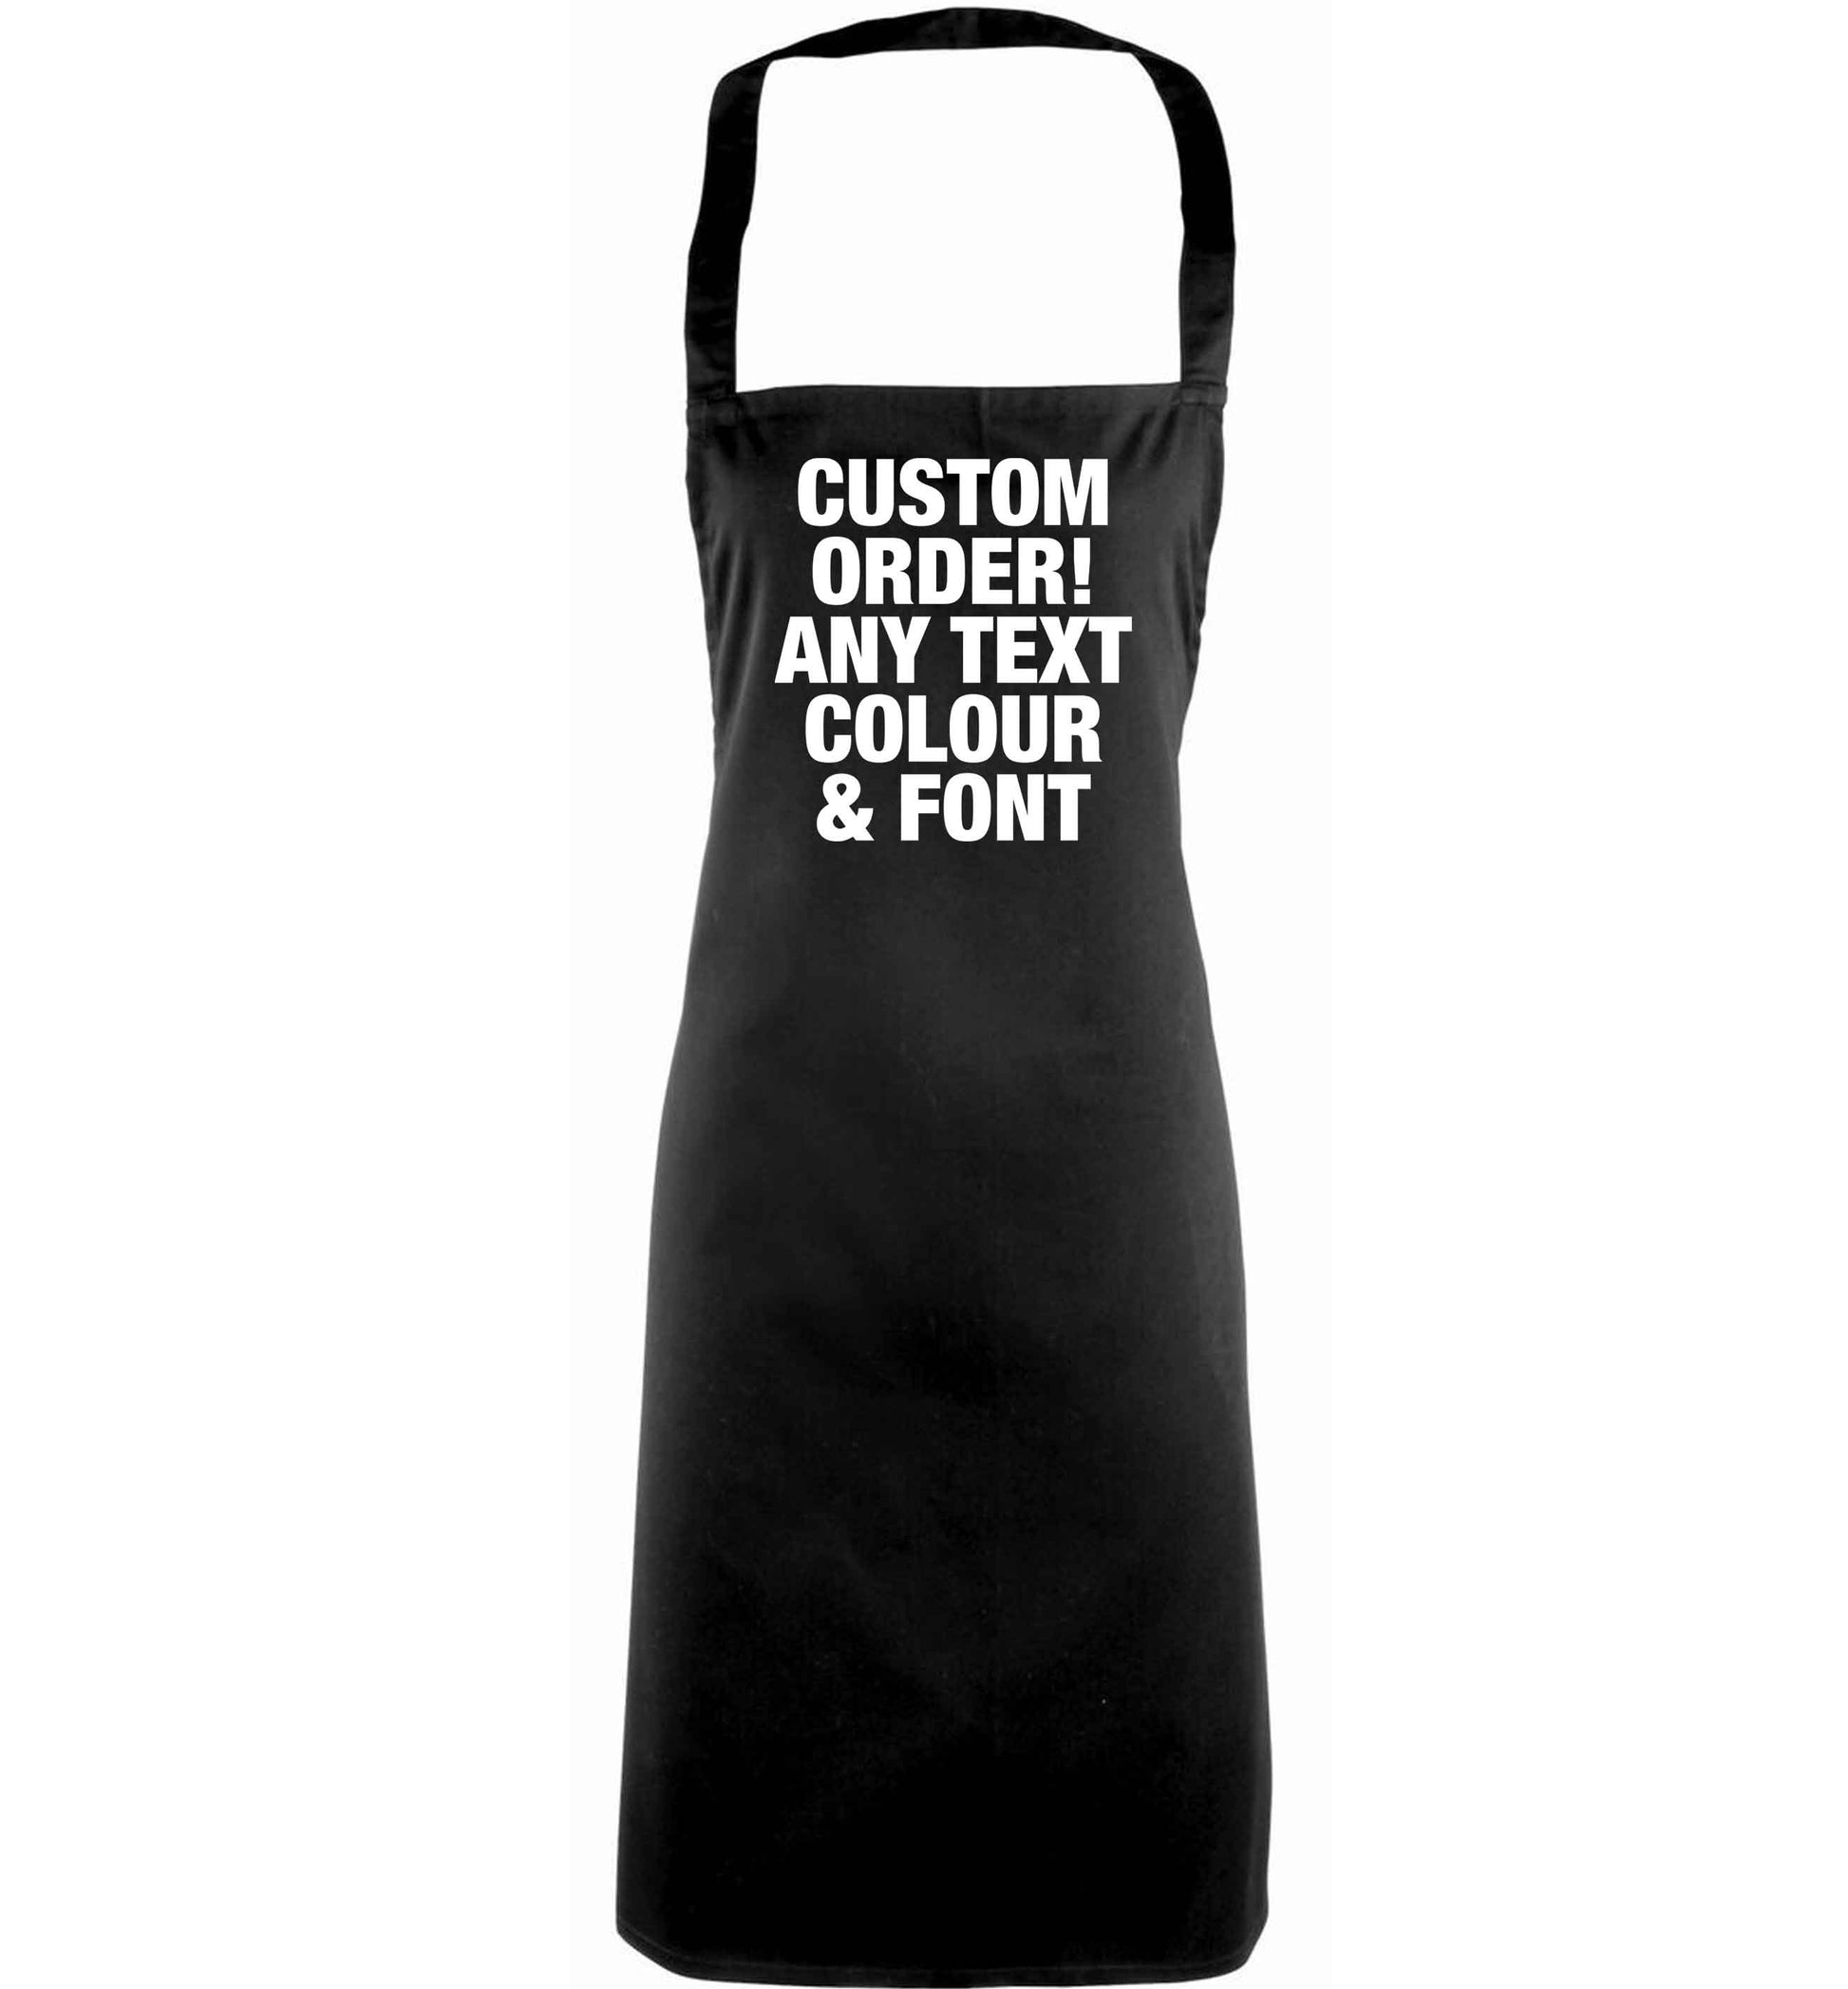 Custom order any text colour and font adults black apron